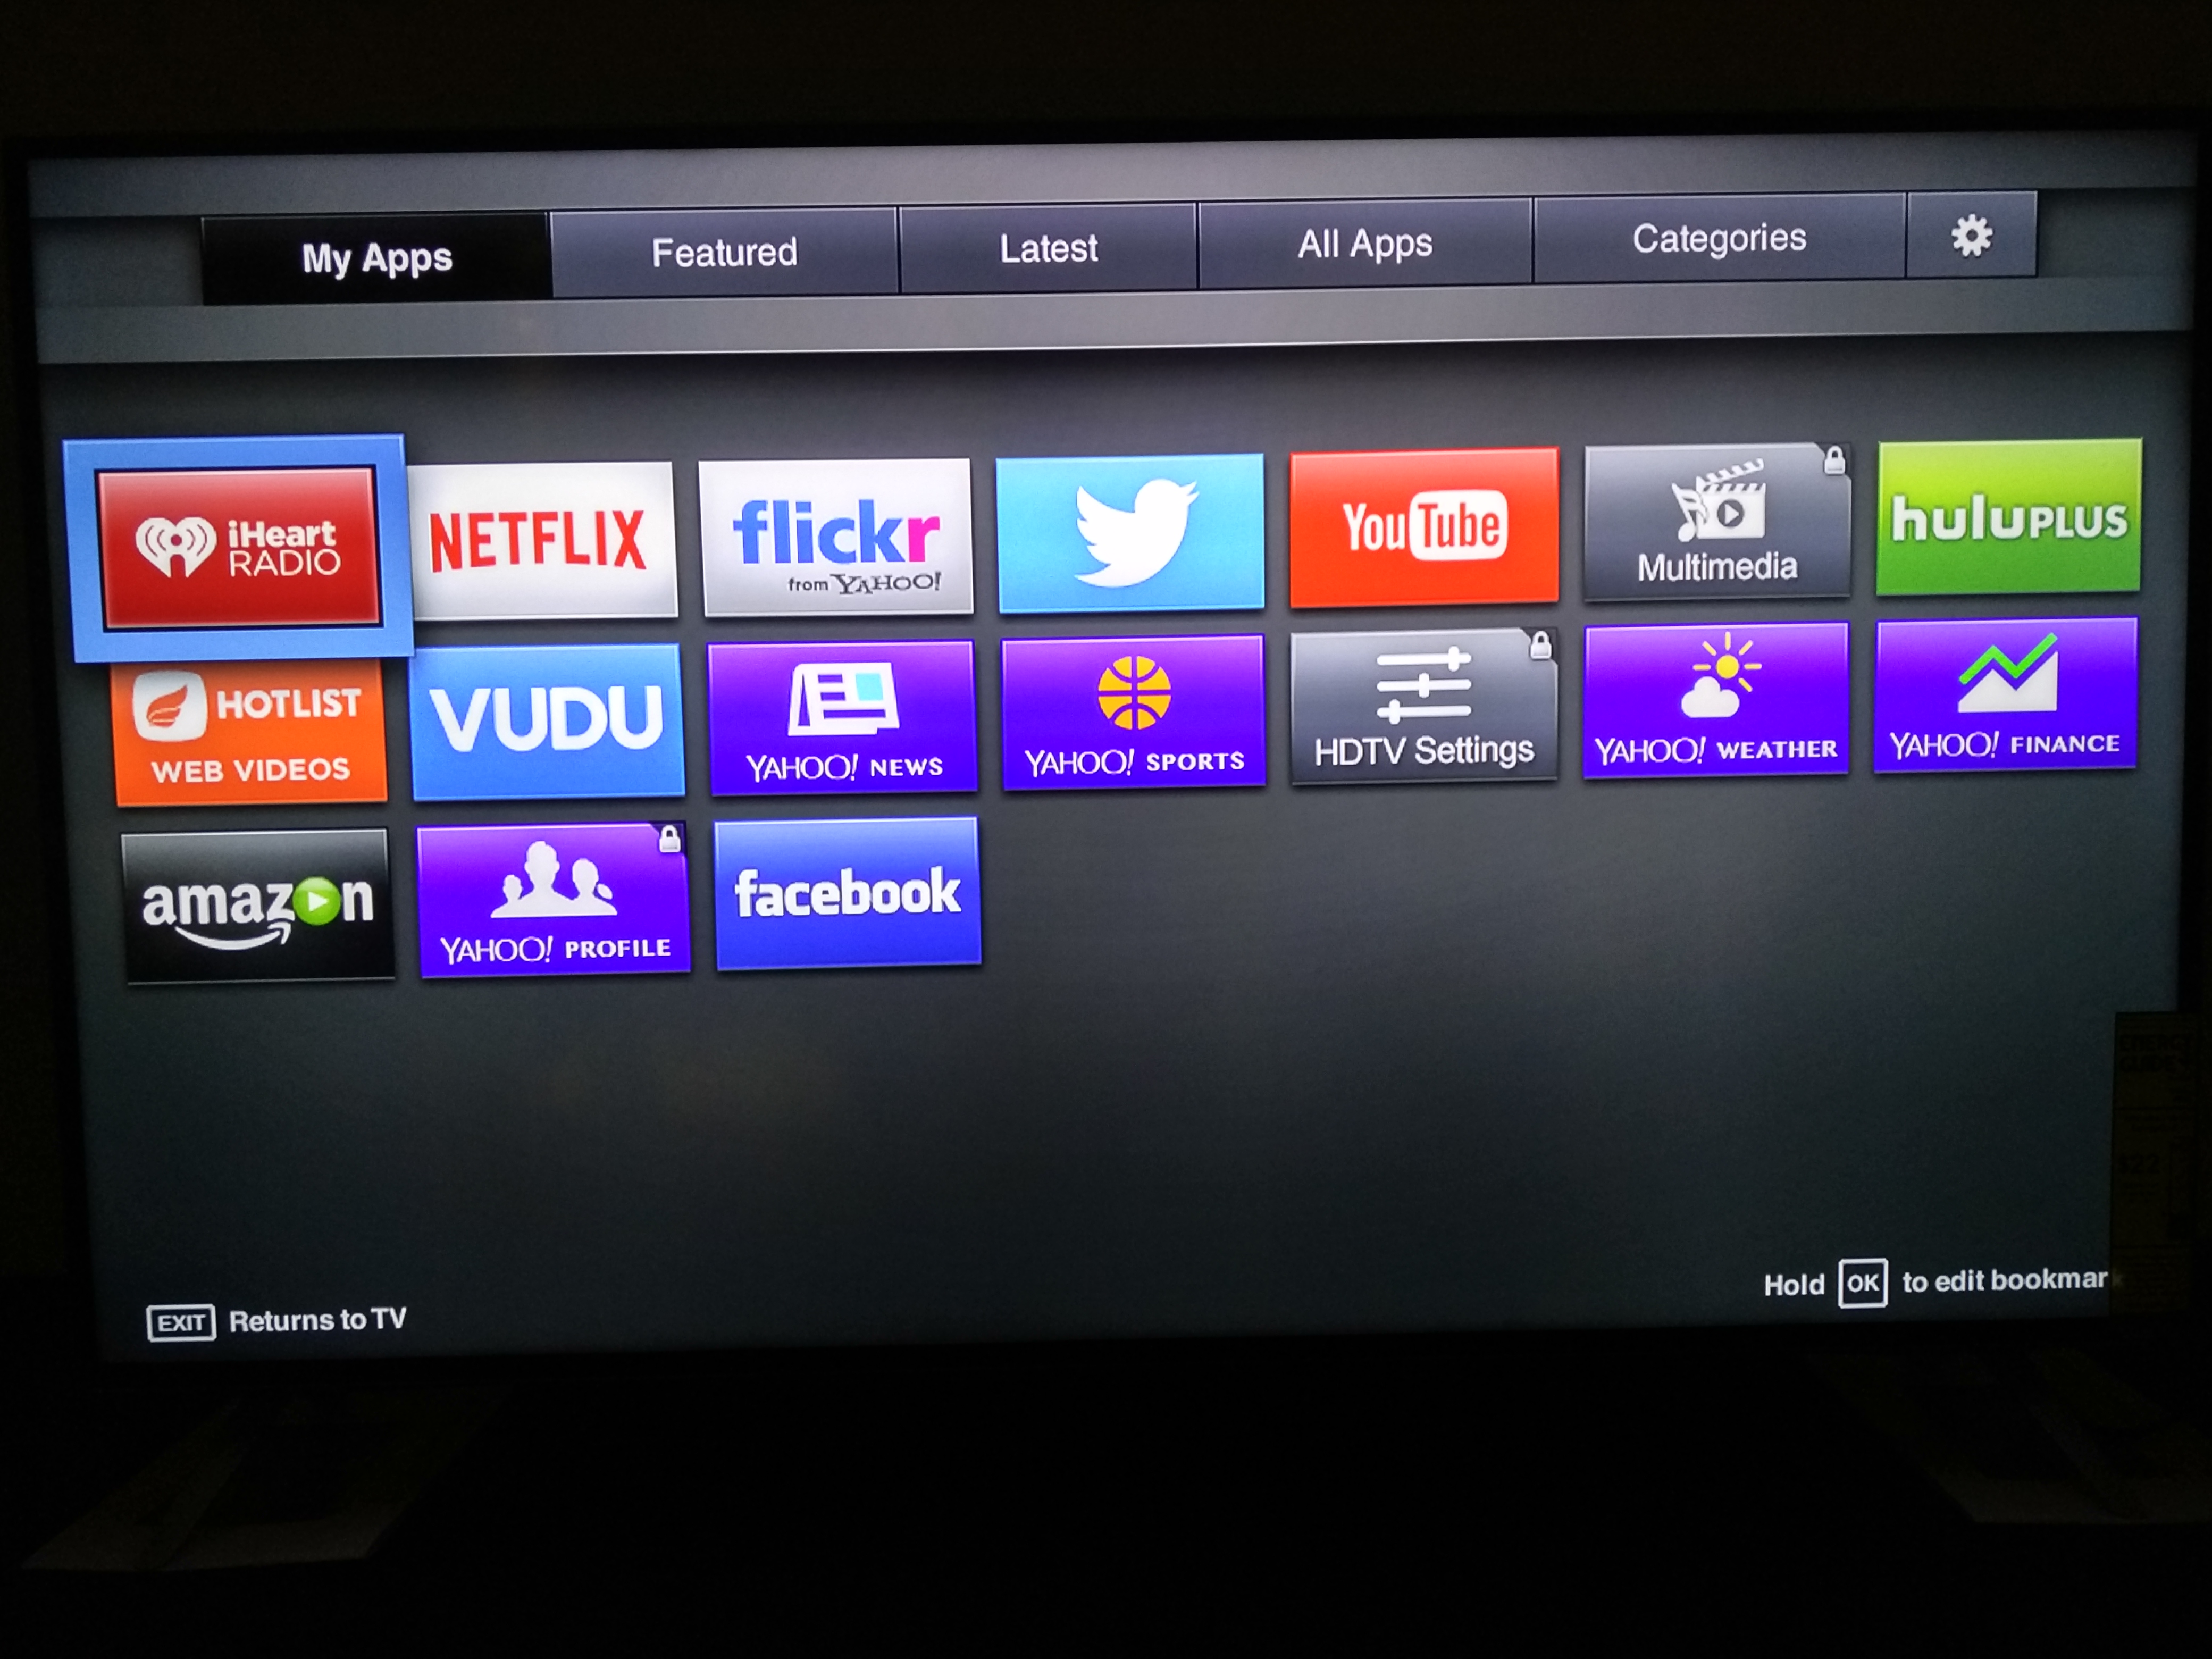 Recommended for M-Series 4K Ultra HD Smart TV by Vizio - GTrusted - How To Download App To Vizio Smart Tv